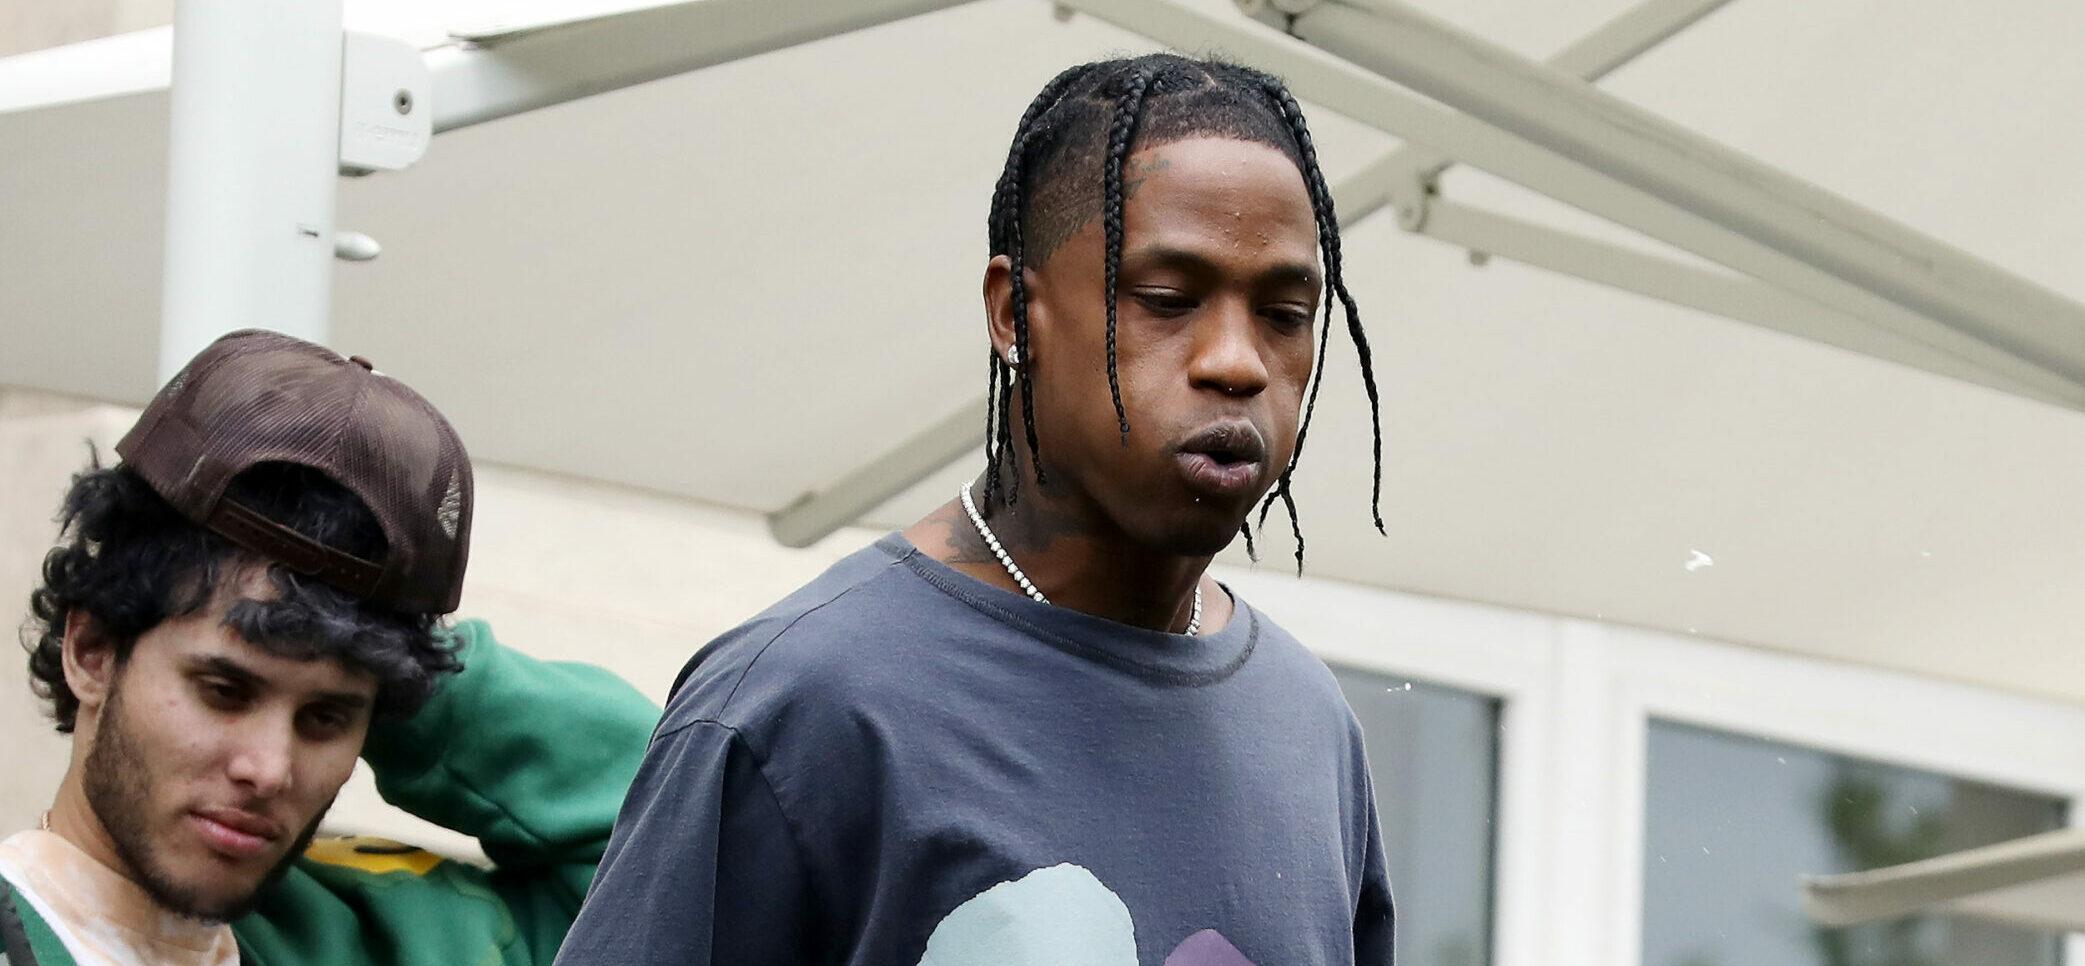 Legal Experts Explain Why Astroworld Festival Tragedies May Not Fall On Travis Scott